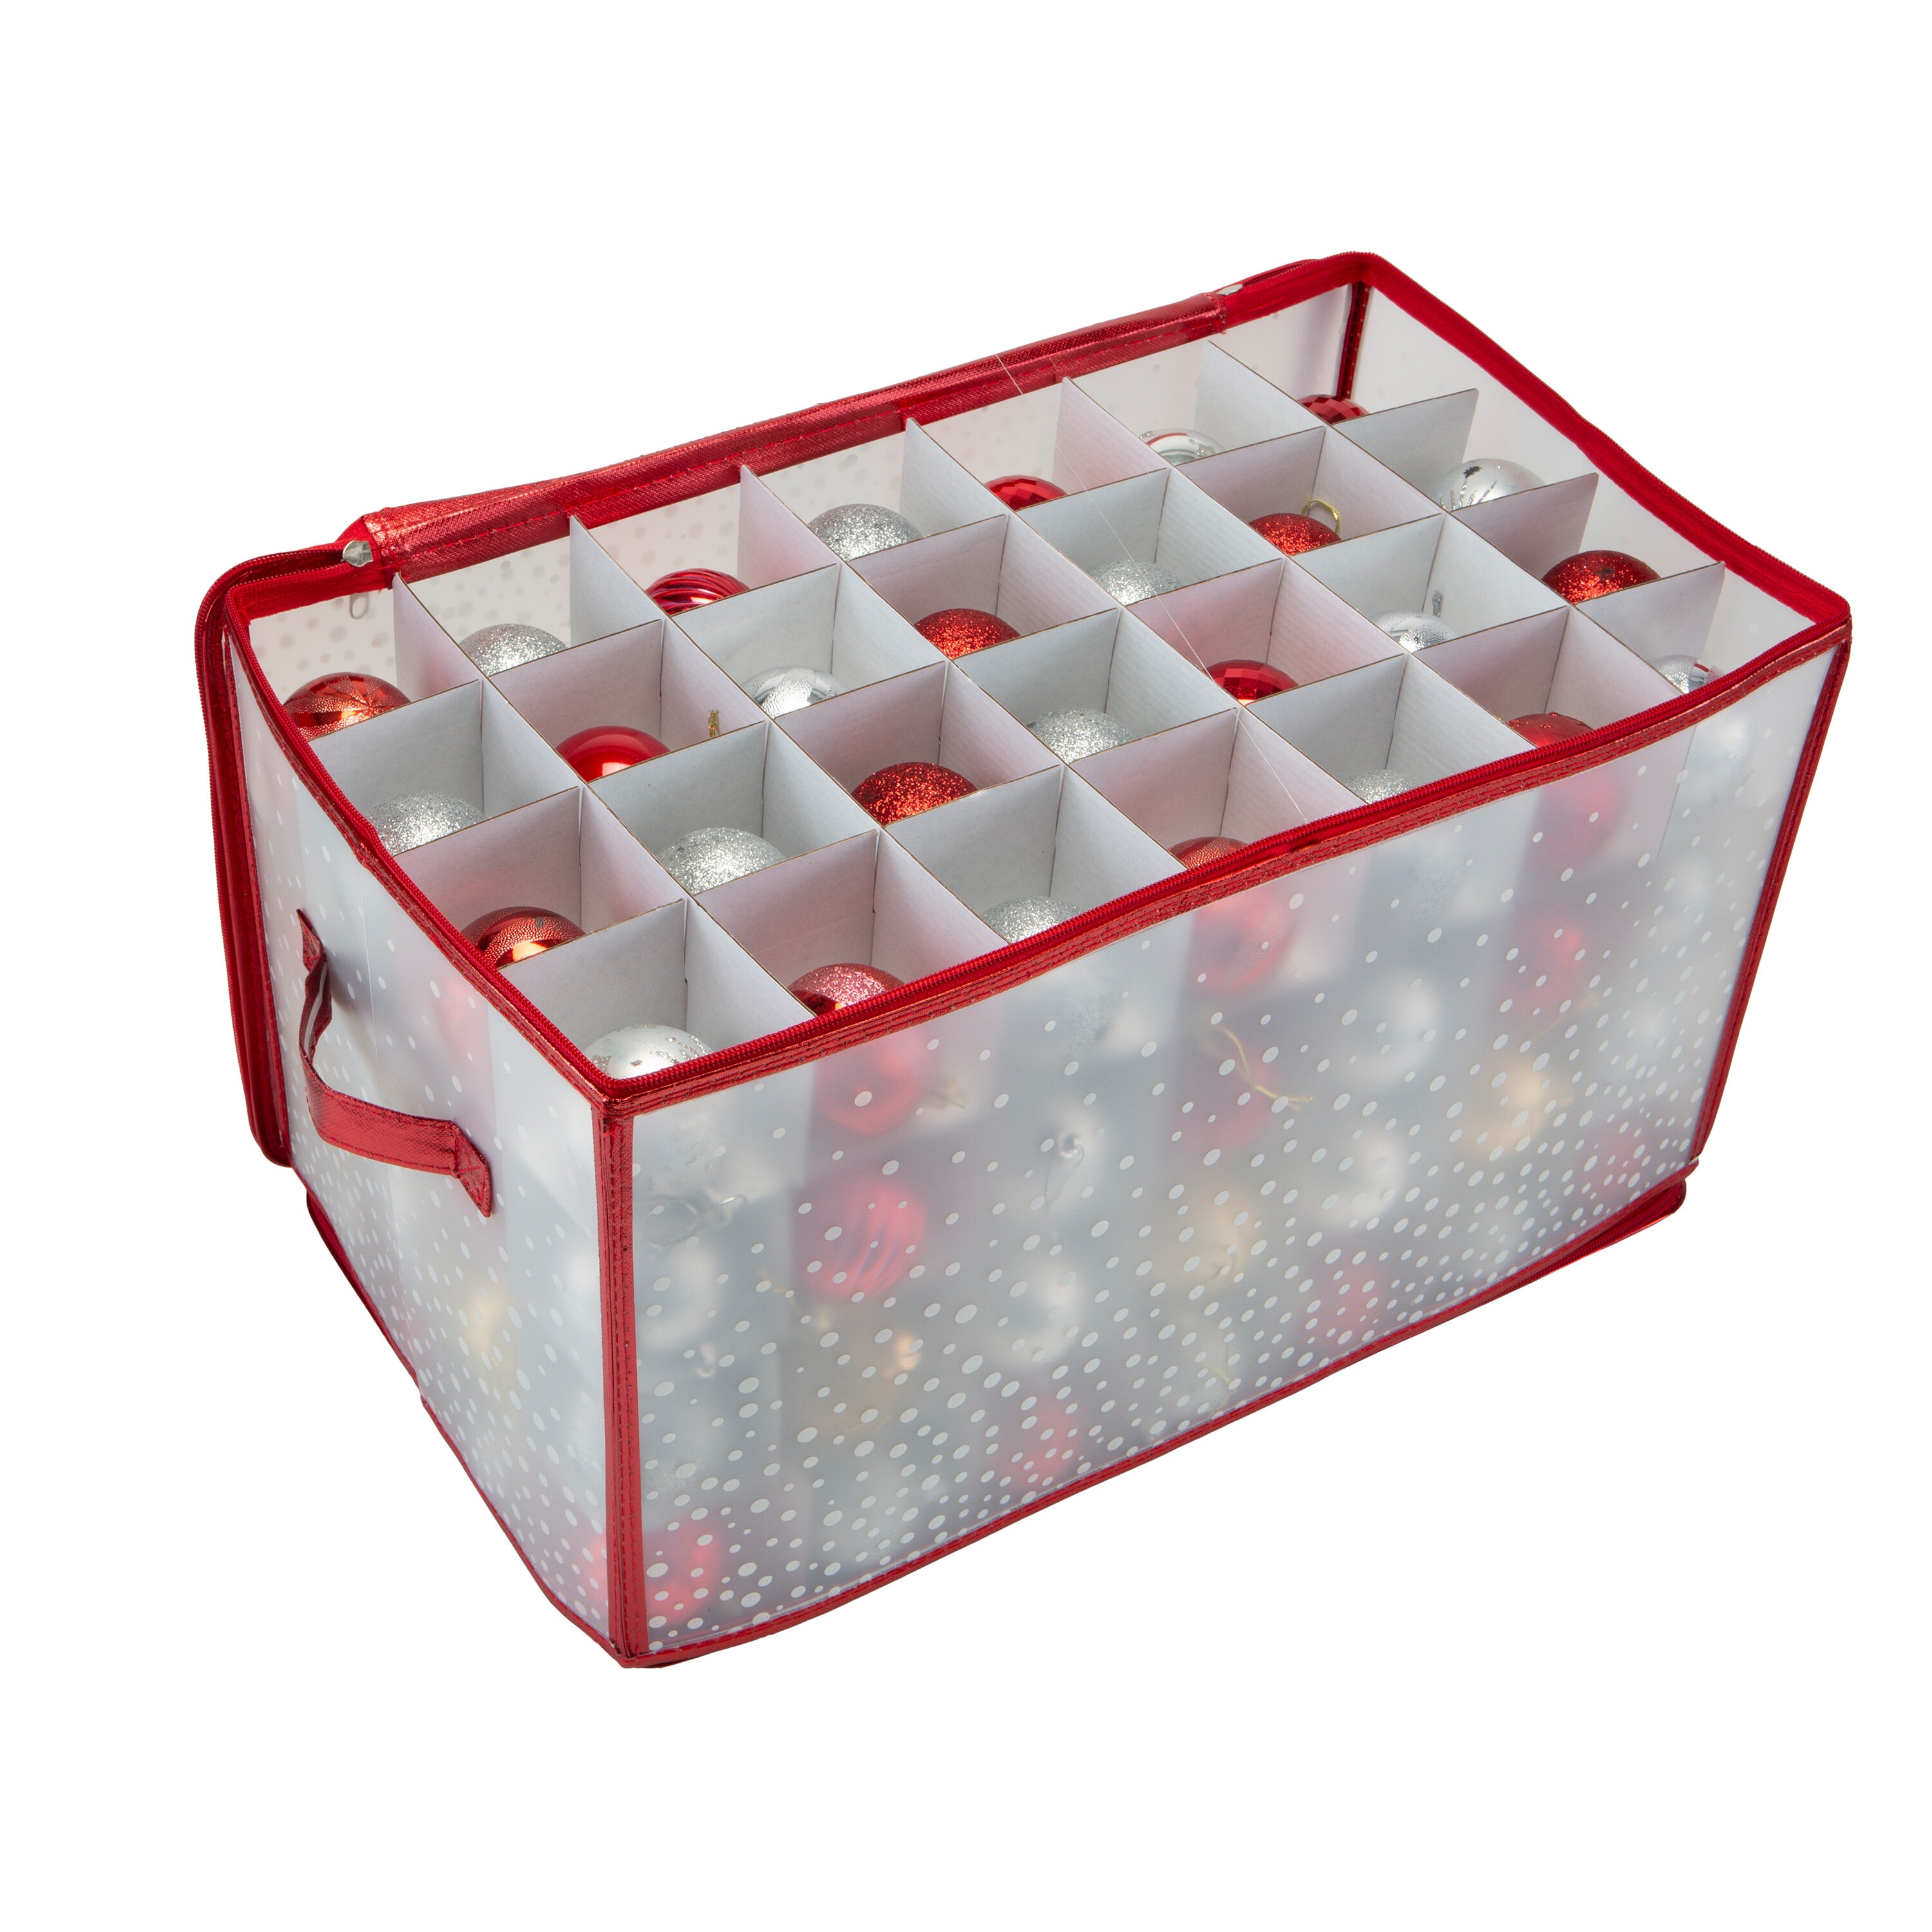 Simplify 20.67-in x 11.81-in 27-Compartment Red Polyester Ornament